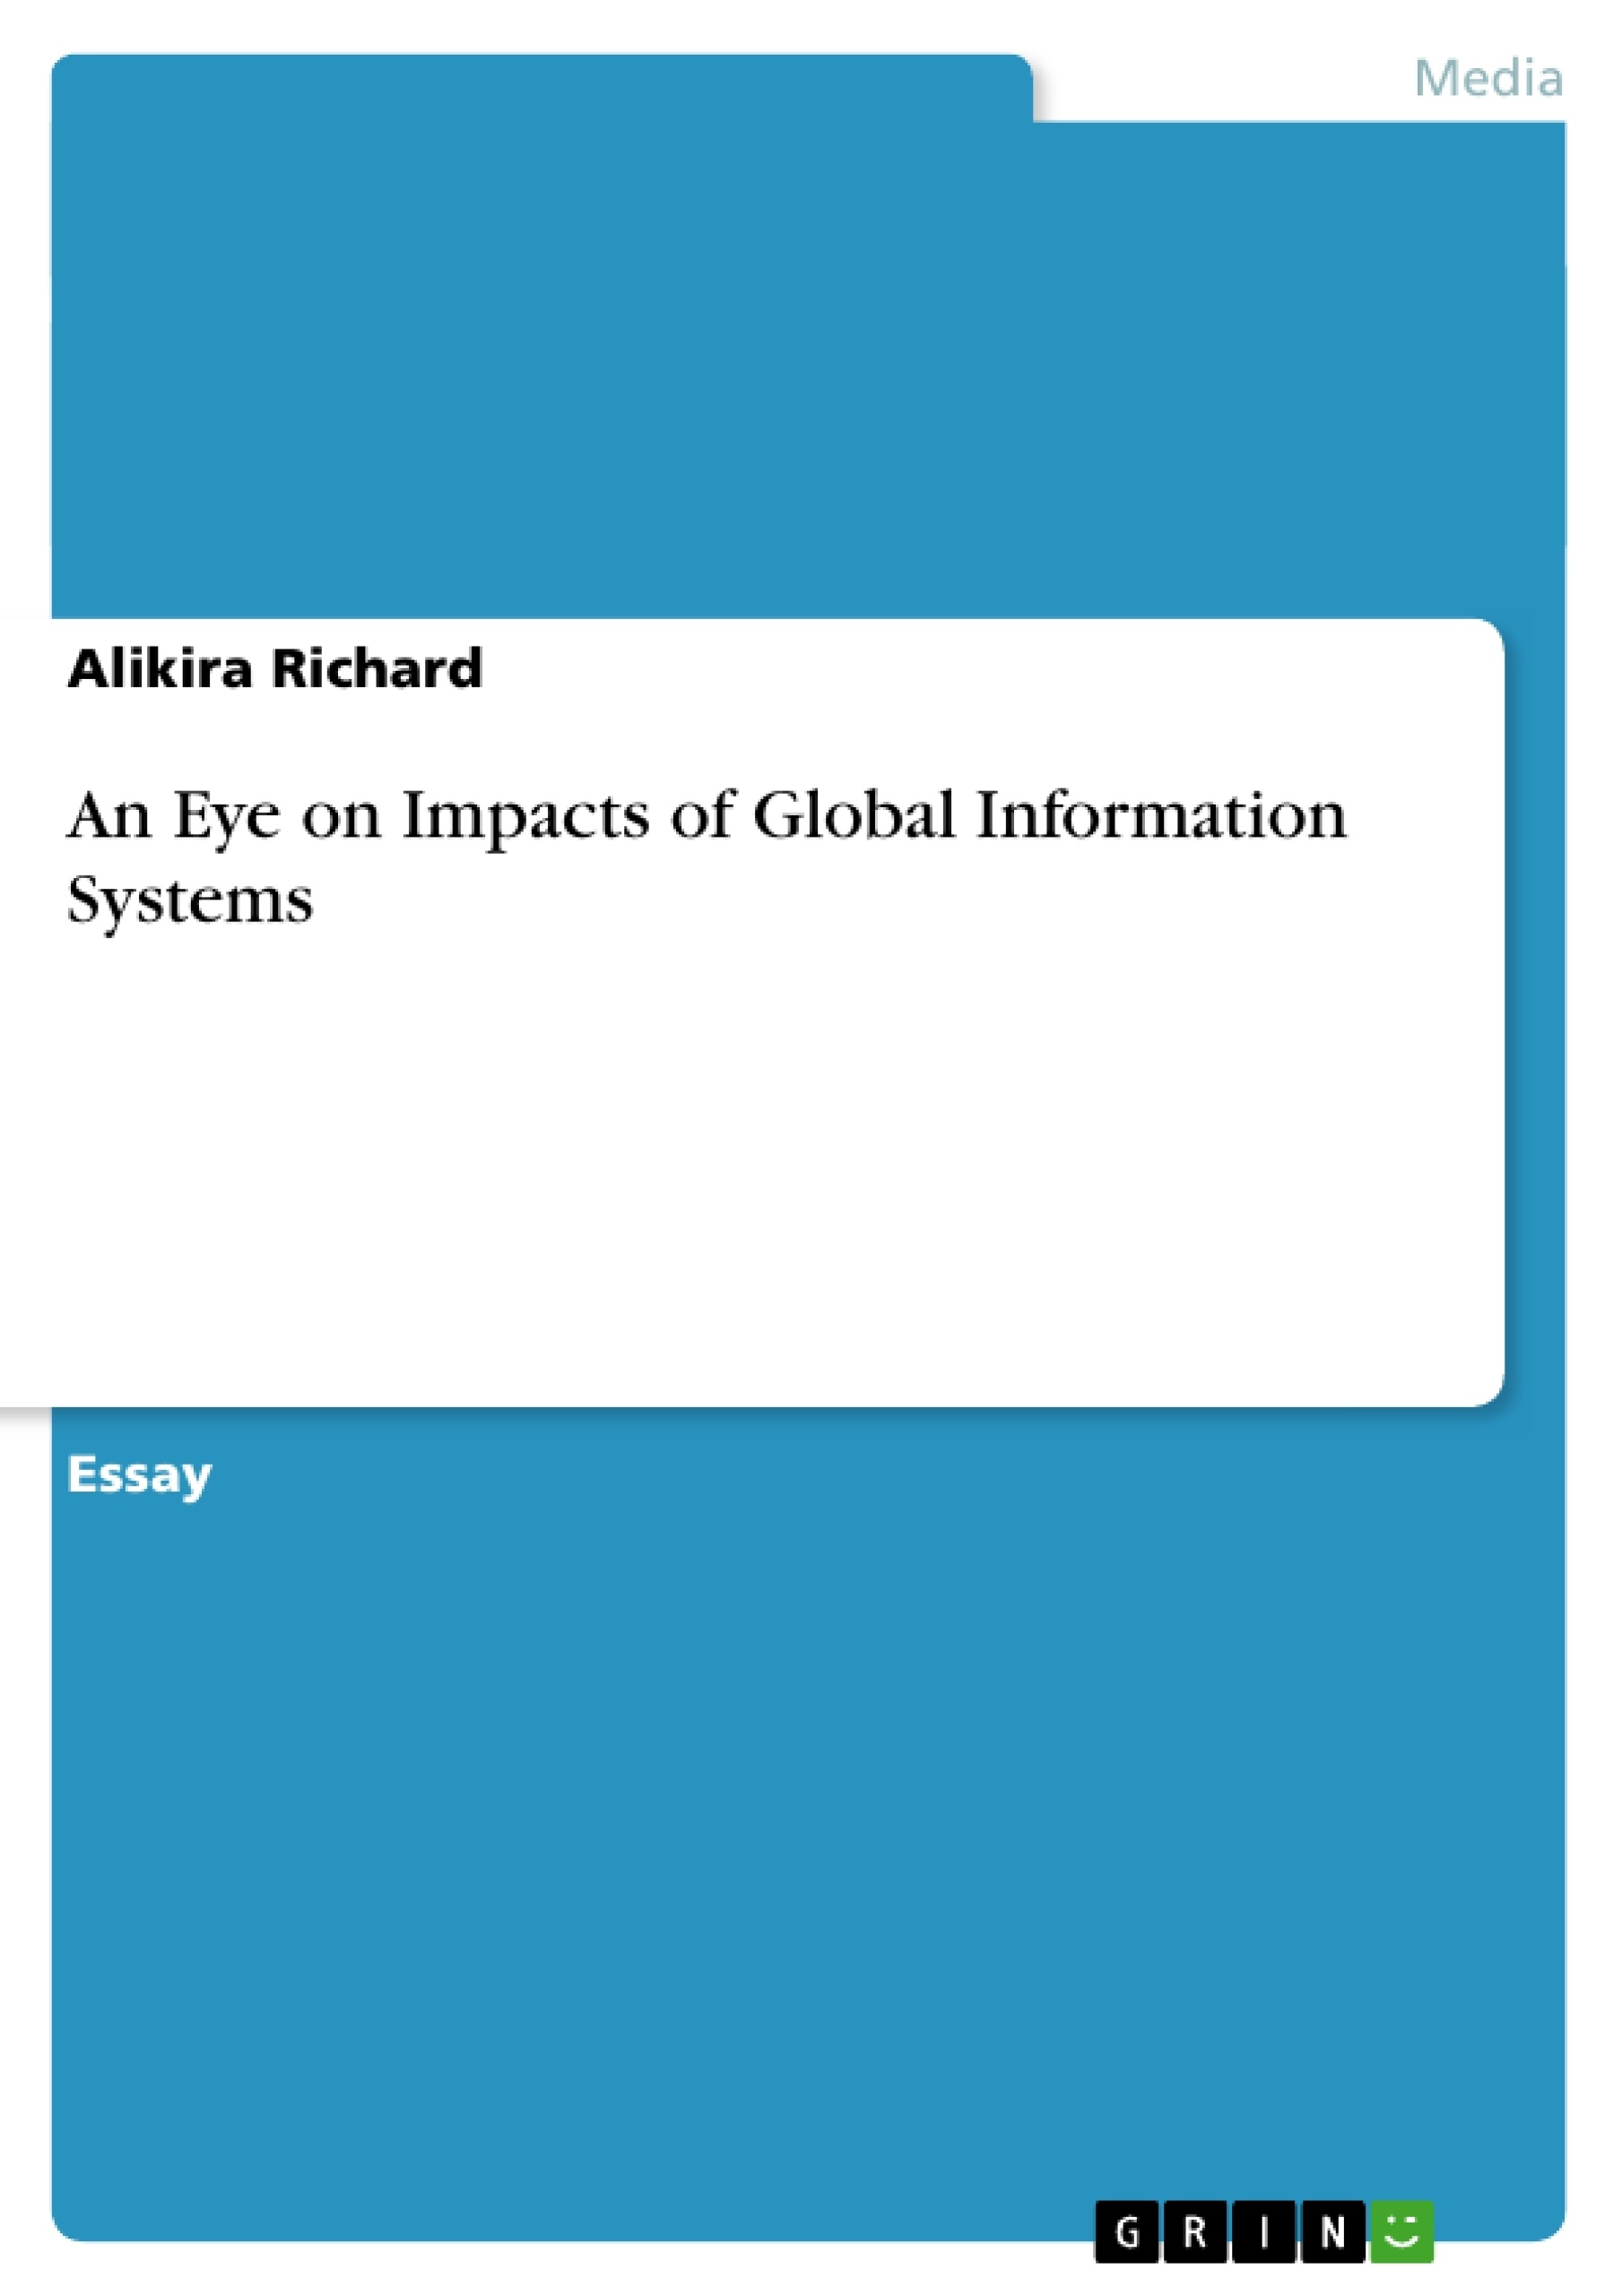 Titel: An Eye on Impacts of Global Information Systems